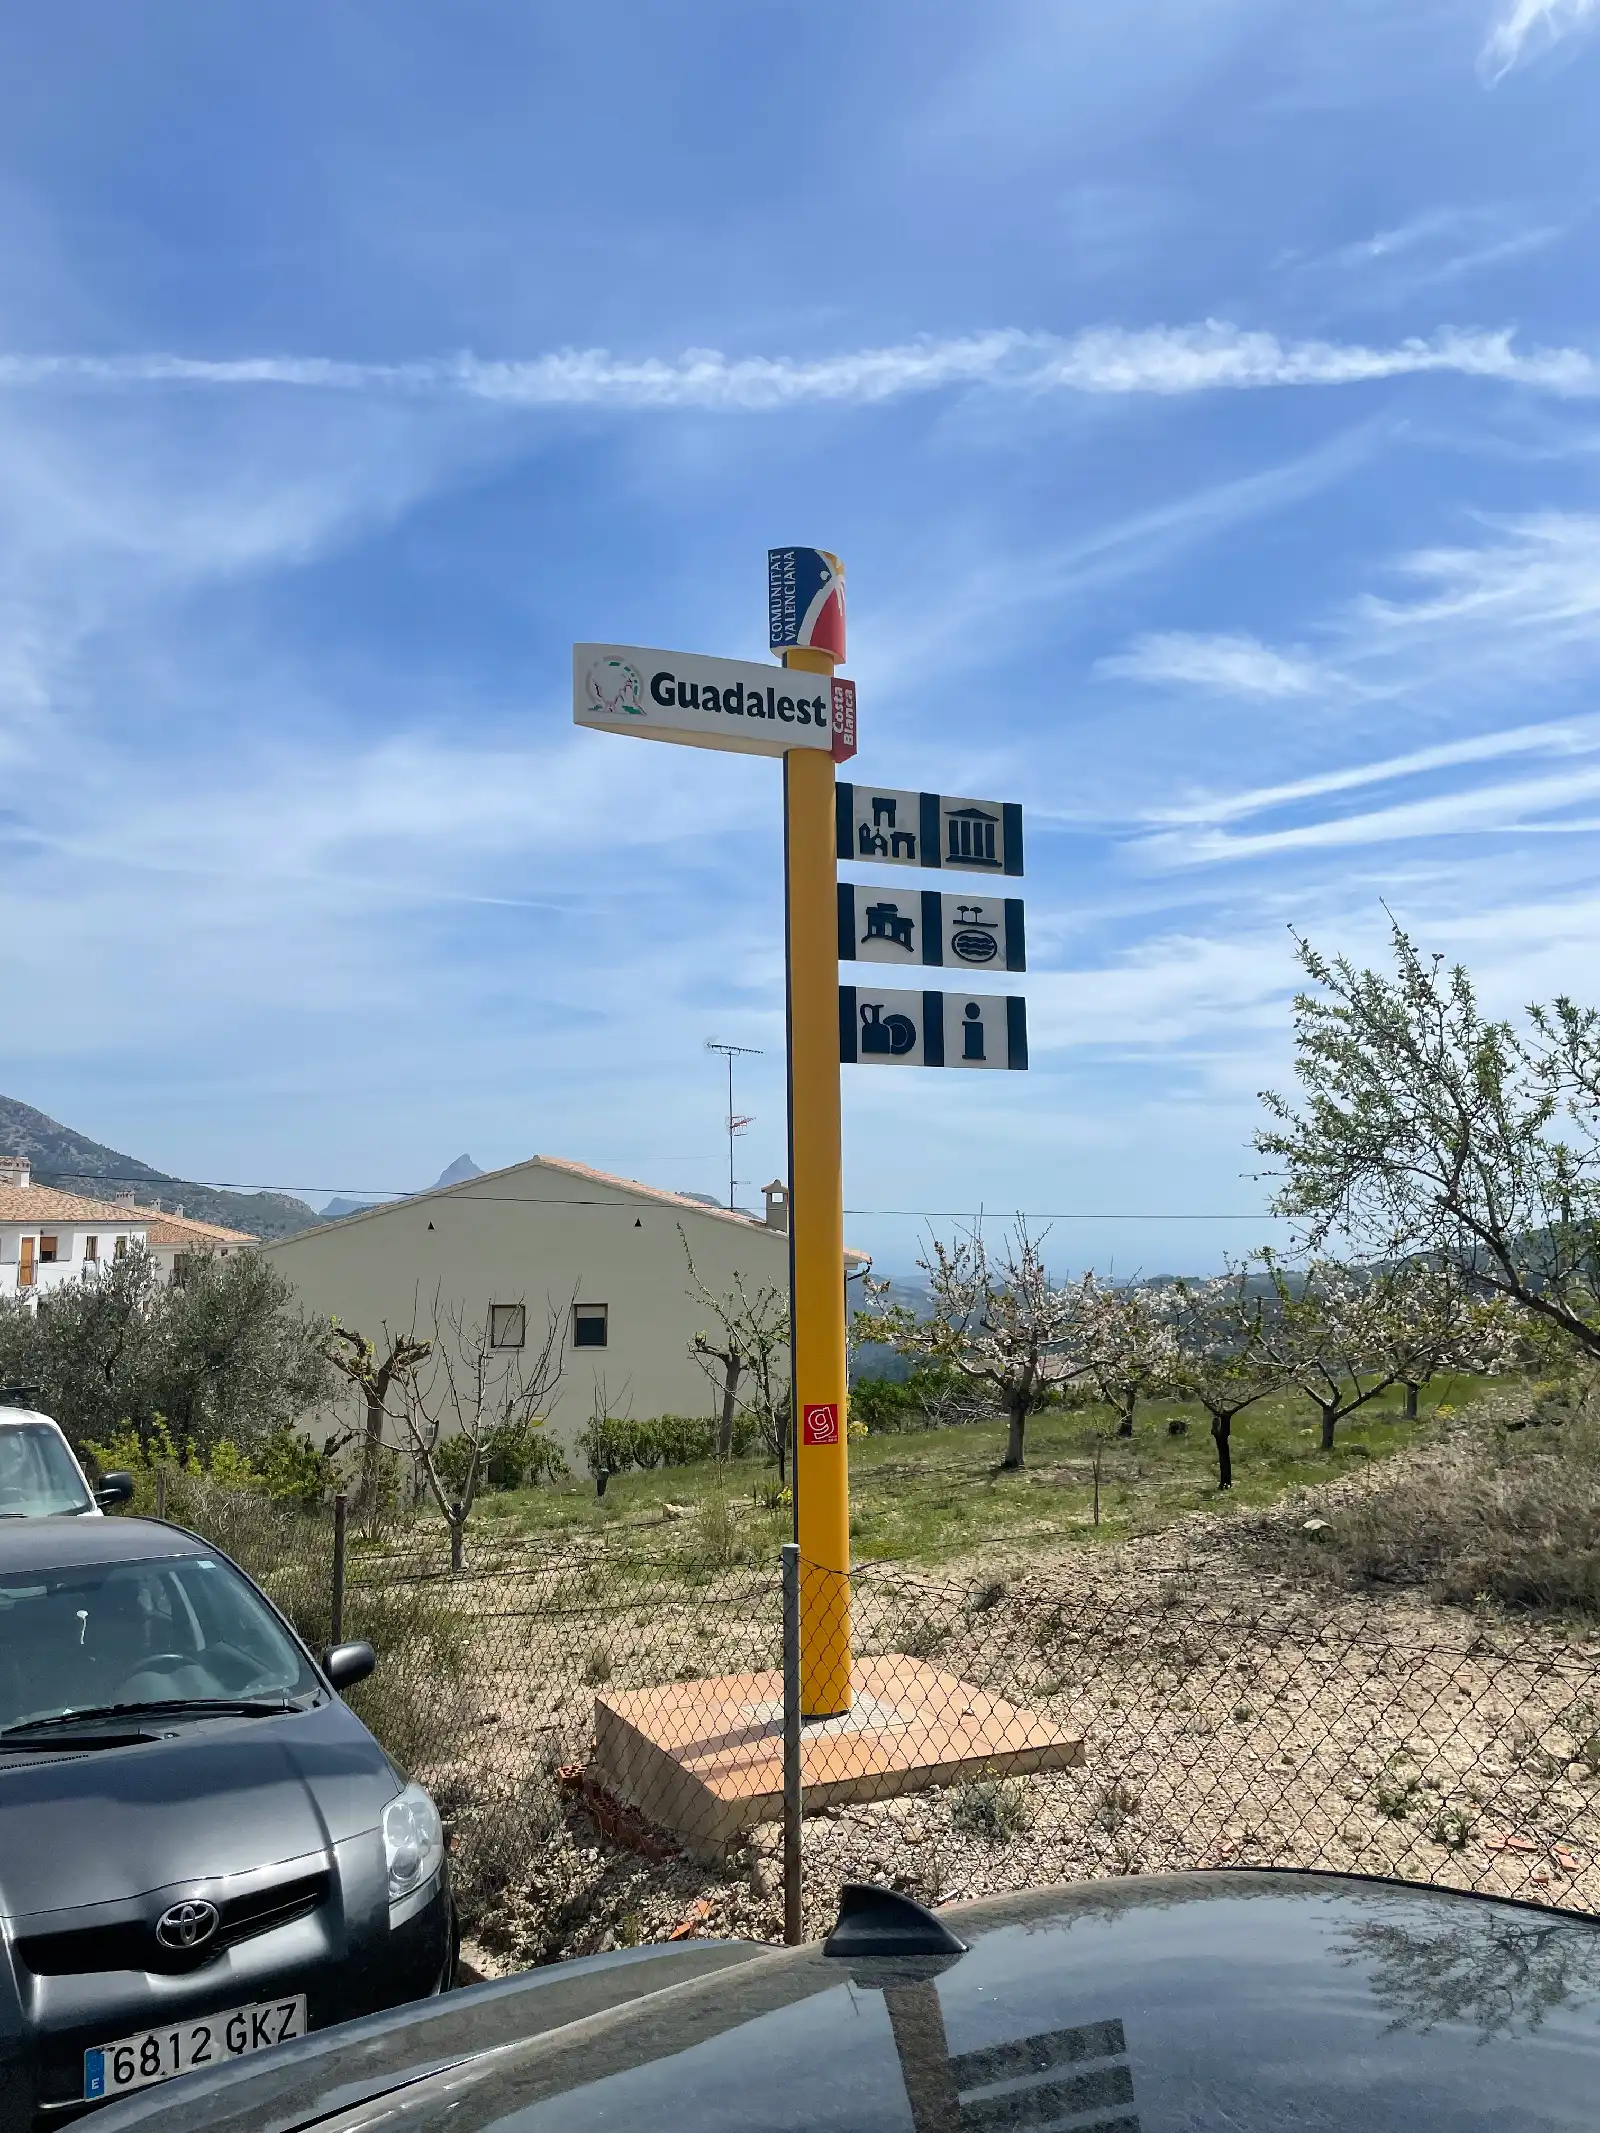 A sign to Guadalest